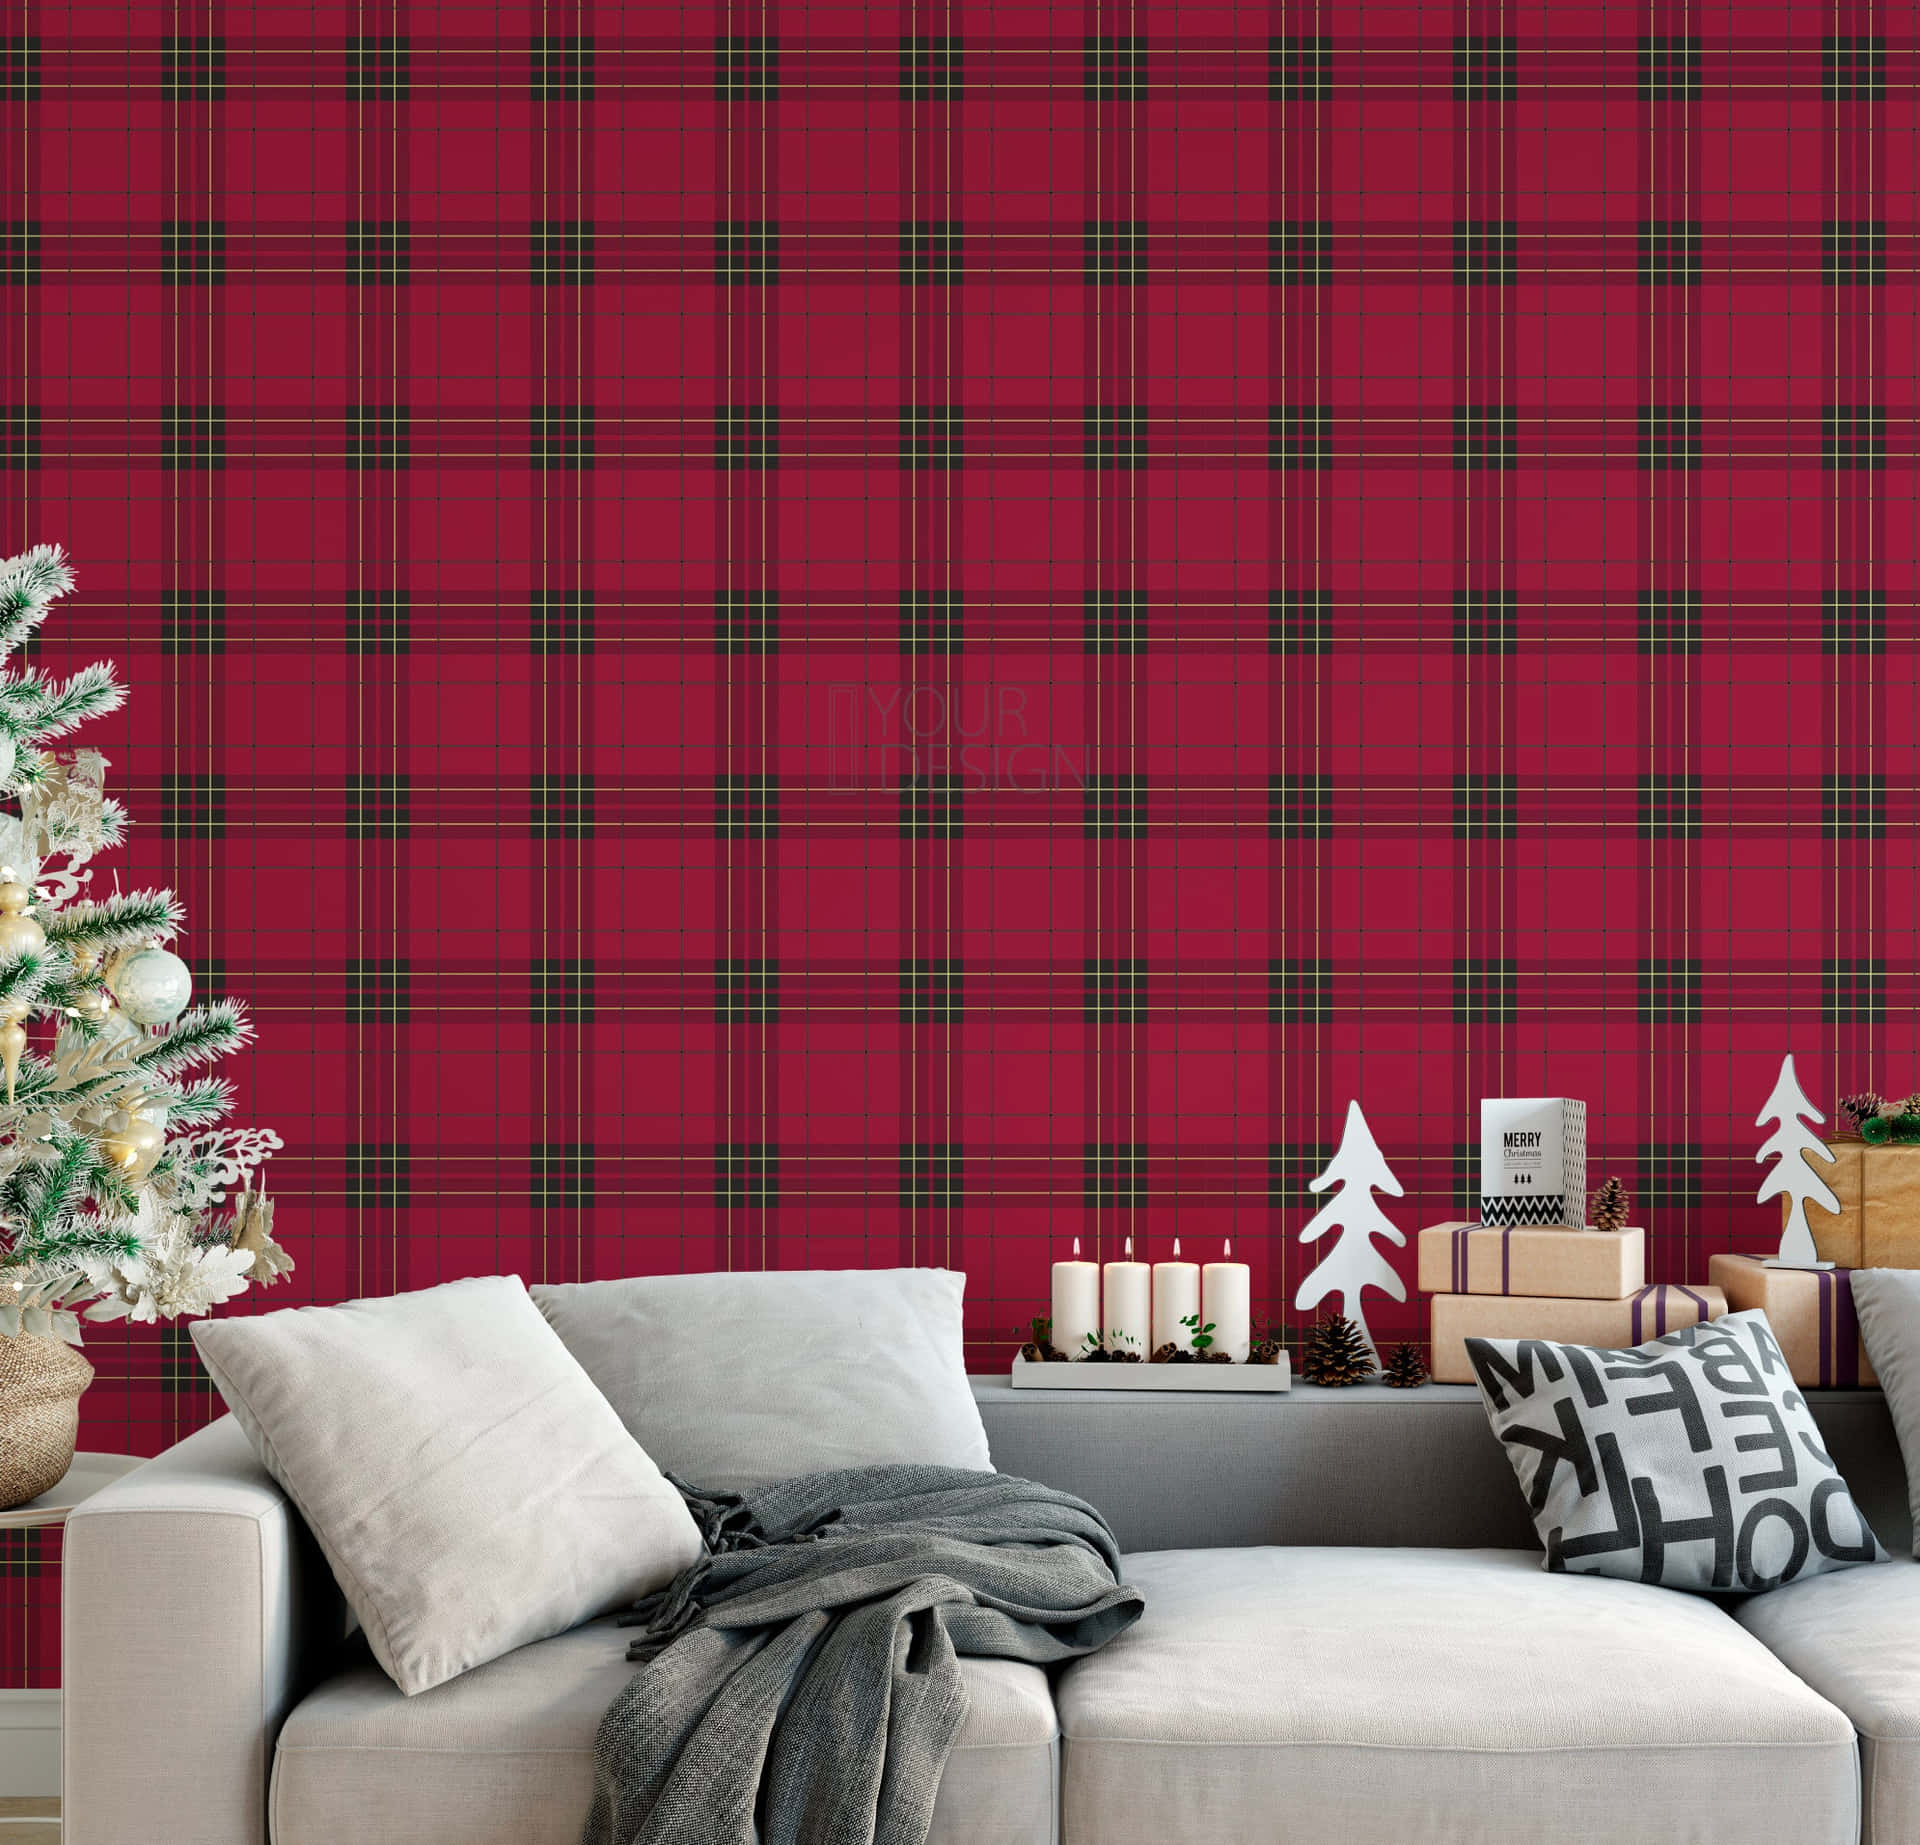 Black and red plaid never looked so chic Wallpaper